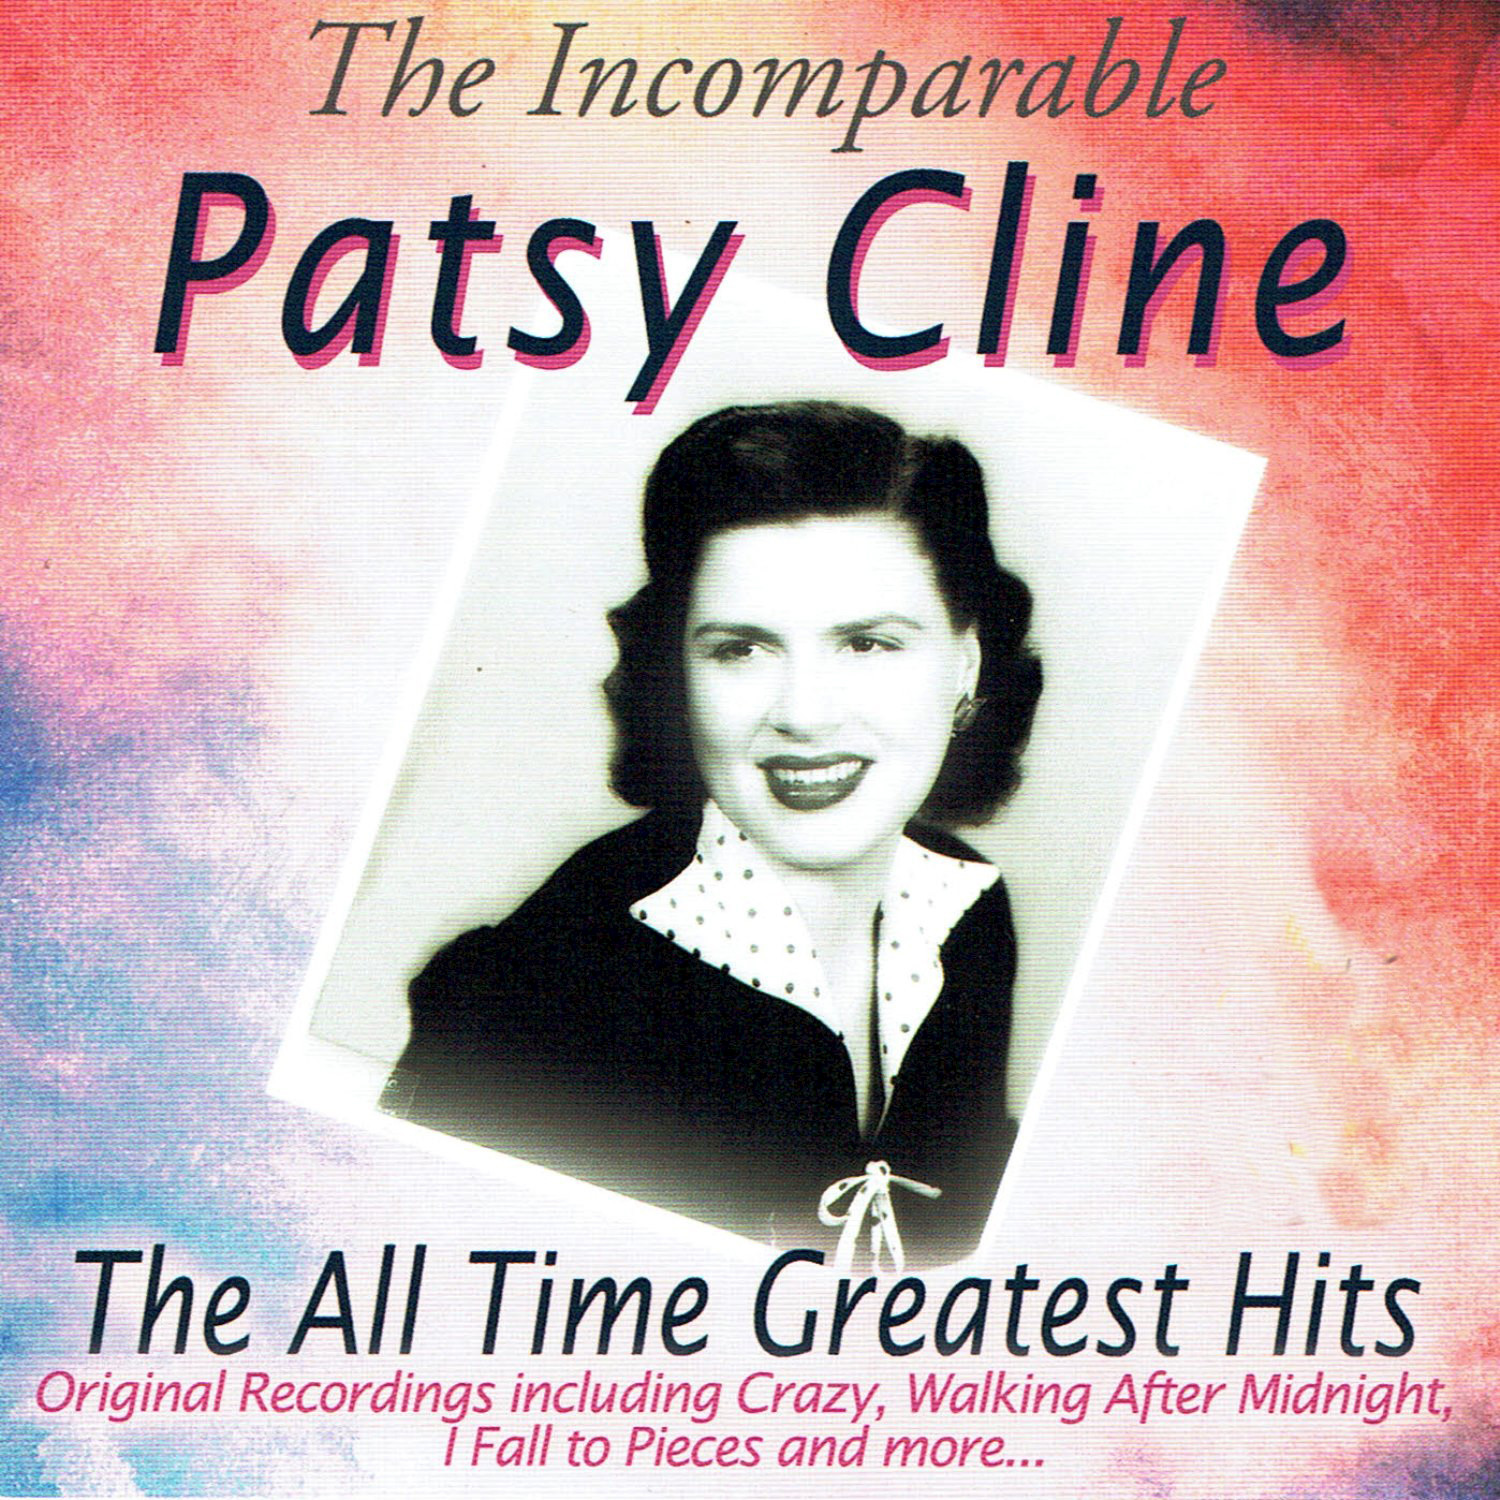 The Incomparable Patsy Cline